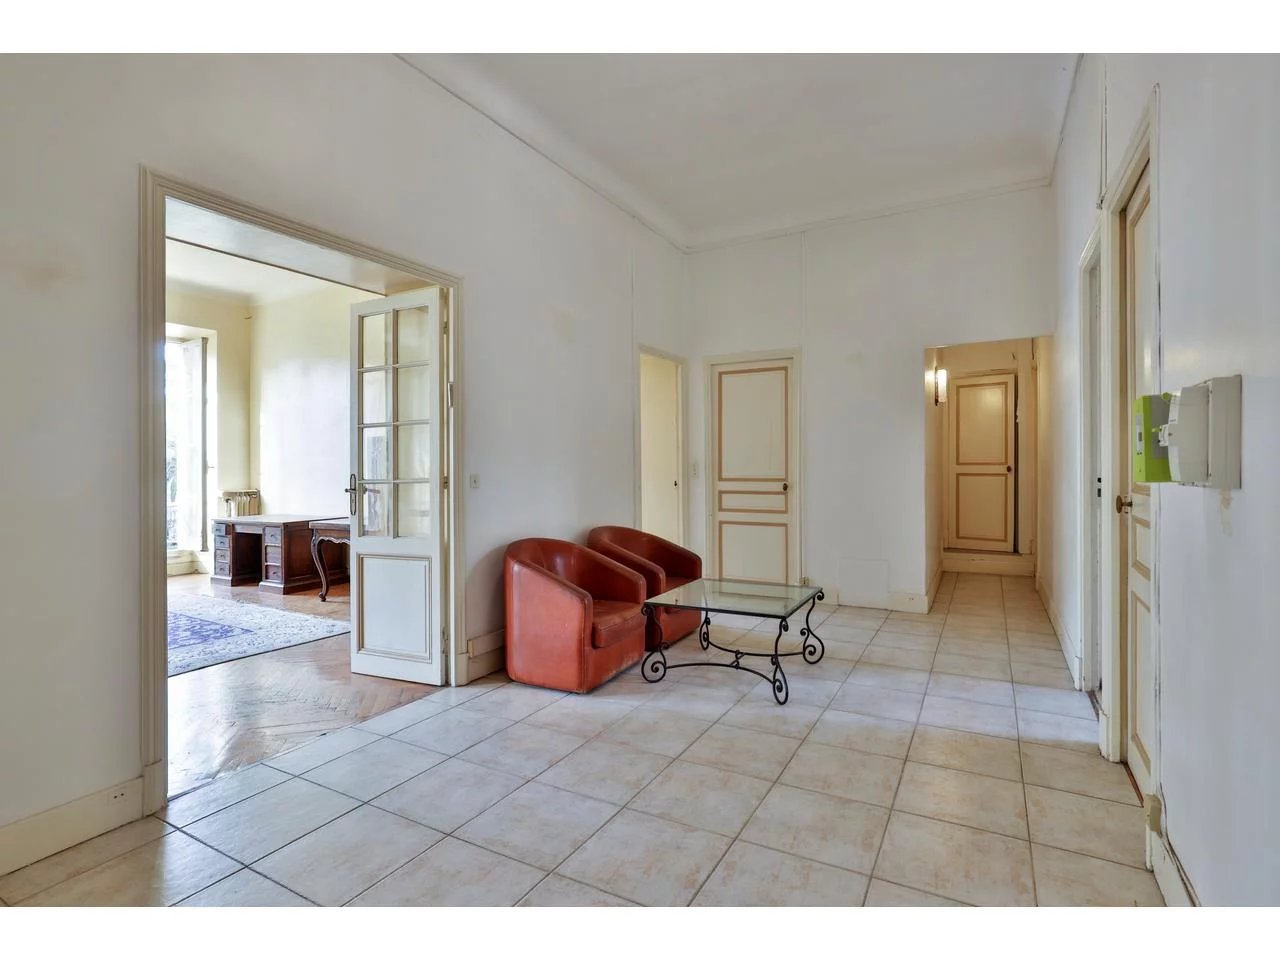 Appartement  4 Rooms 125.45m2  for sale   945 000 €